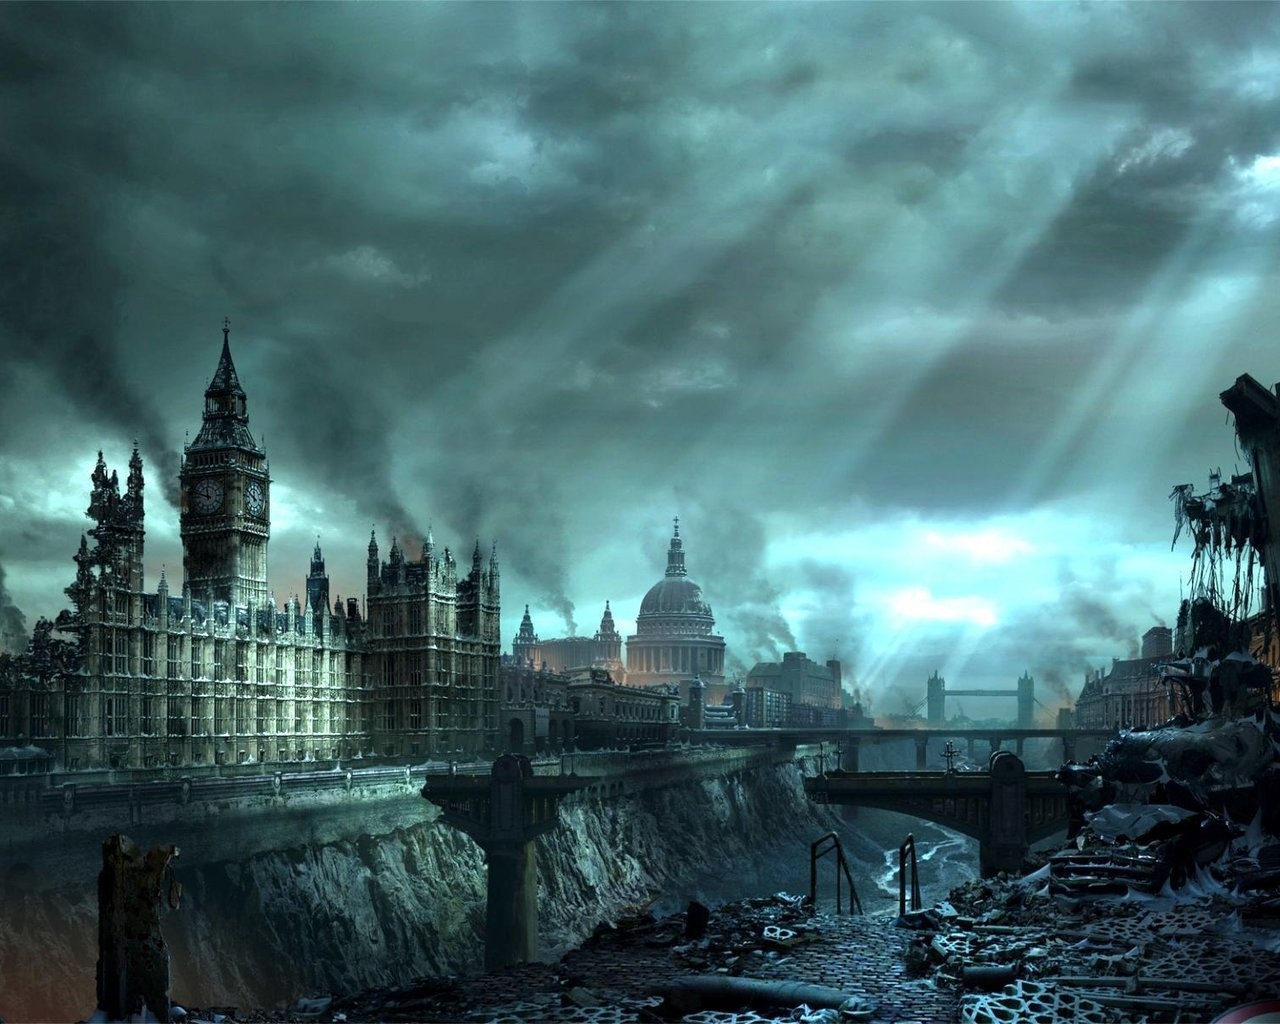 London under disaster for 1280 x 1024 resolution